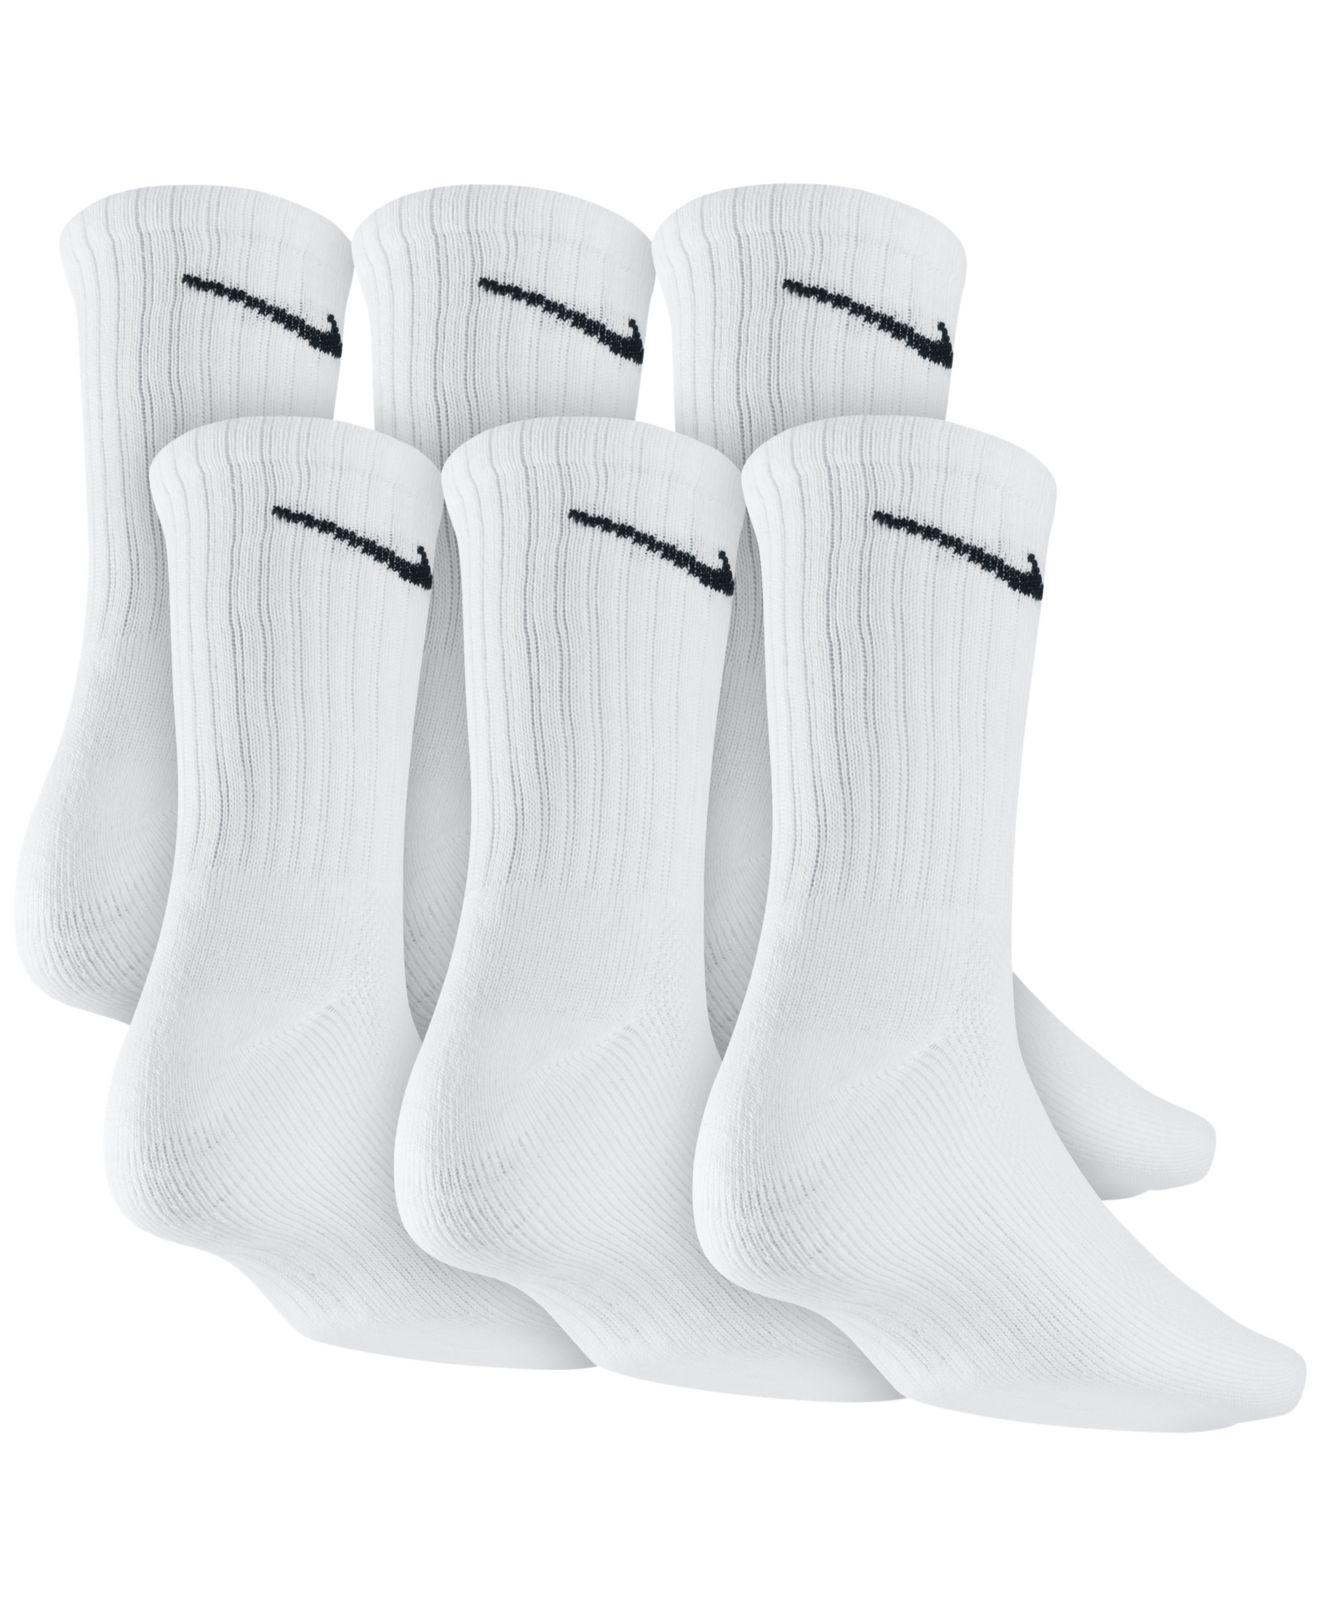 Nike Synthetic Socks, Dri Fit Crew 6 Pairs in White for Men - Save 23% ...